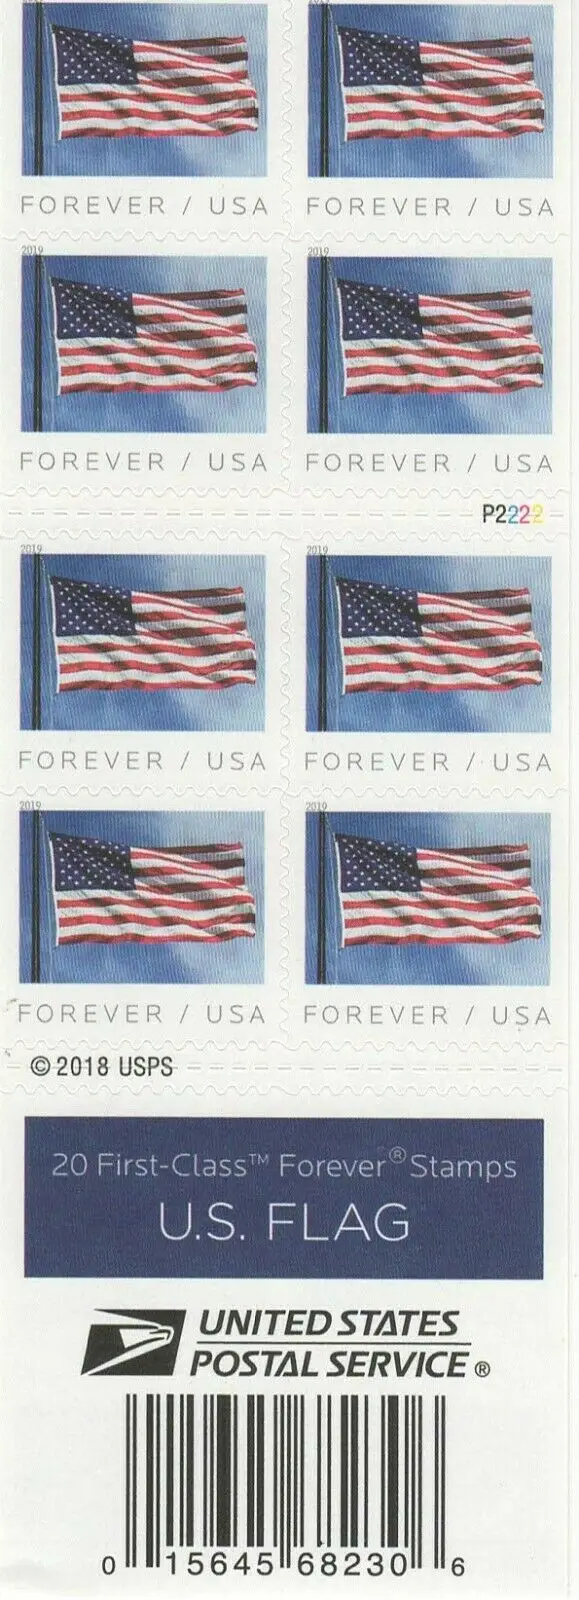 

2019 US Flag 10 Books of 20 USPS Forever First Class Postage Stamps Patriotic American Celebration (200 Stamps)